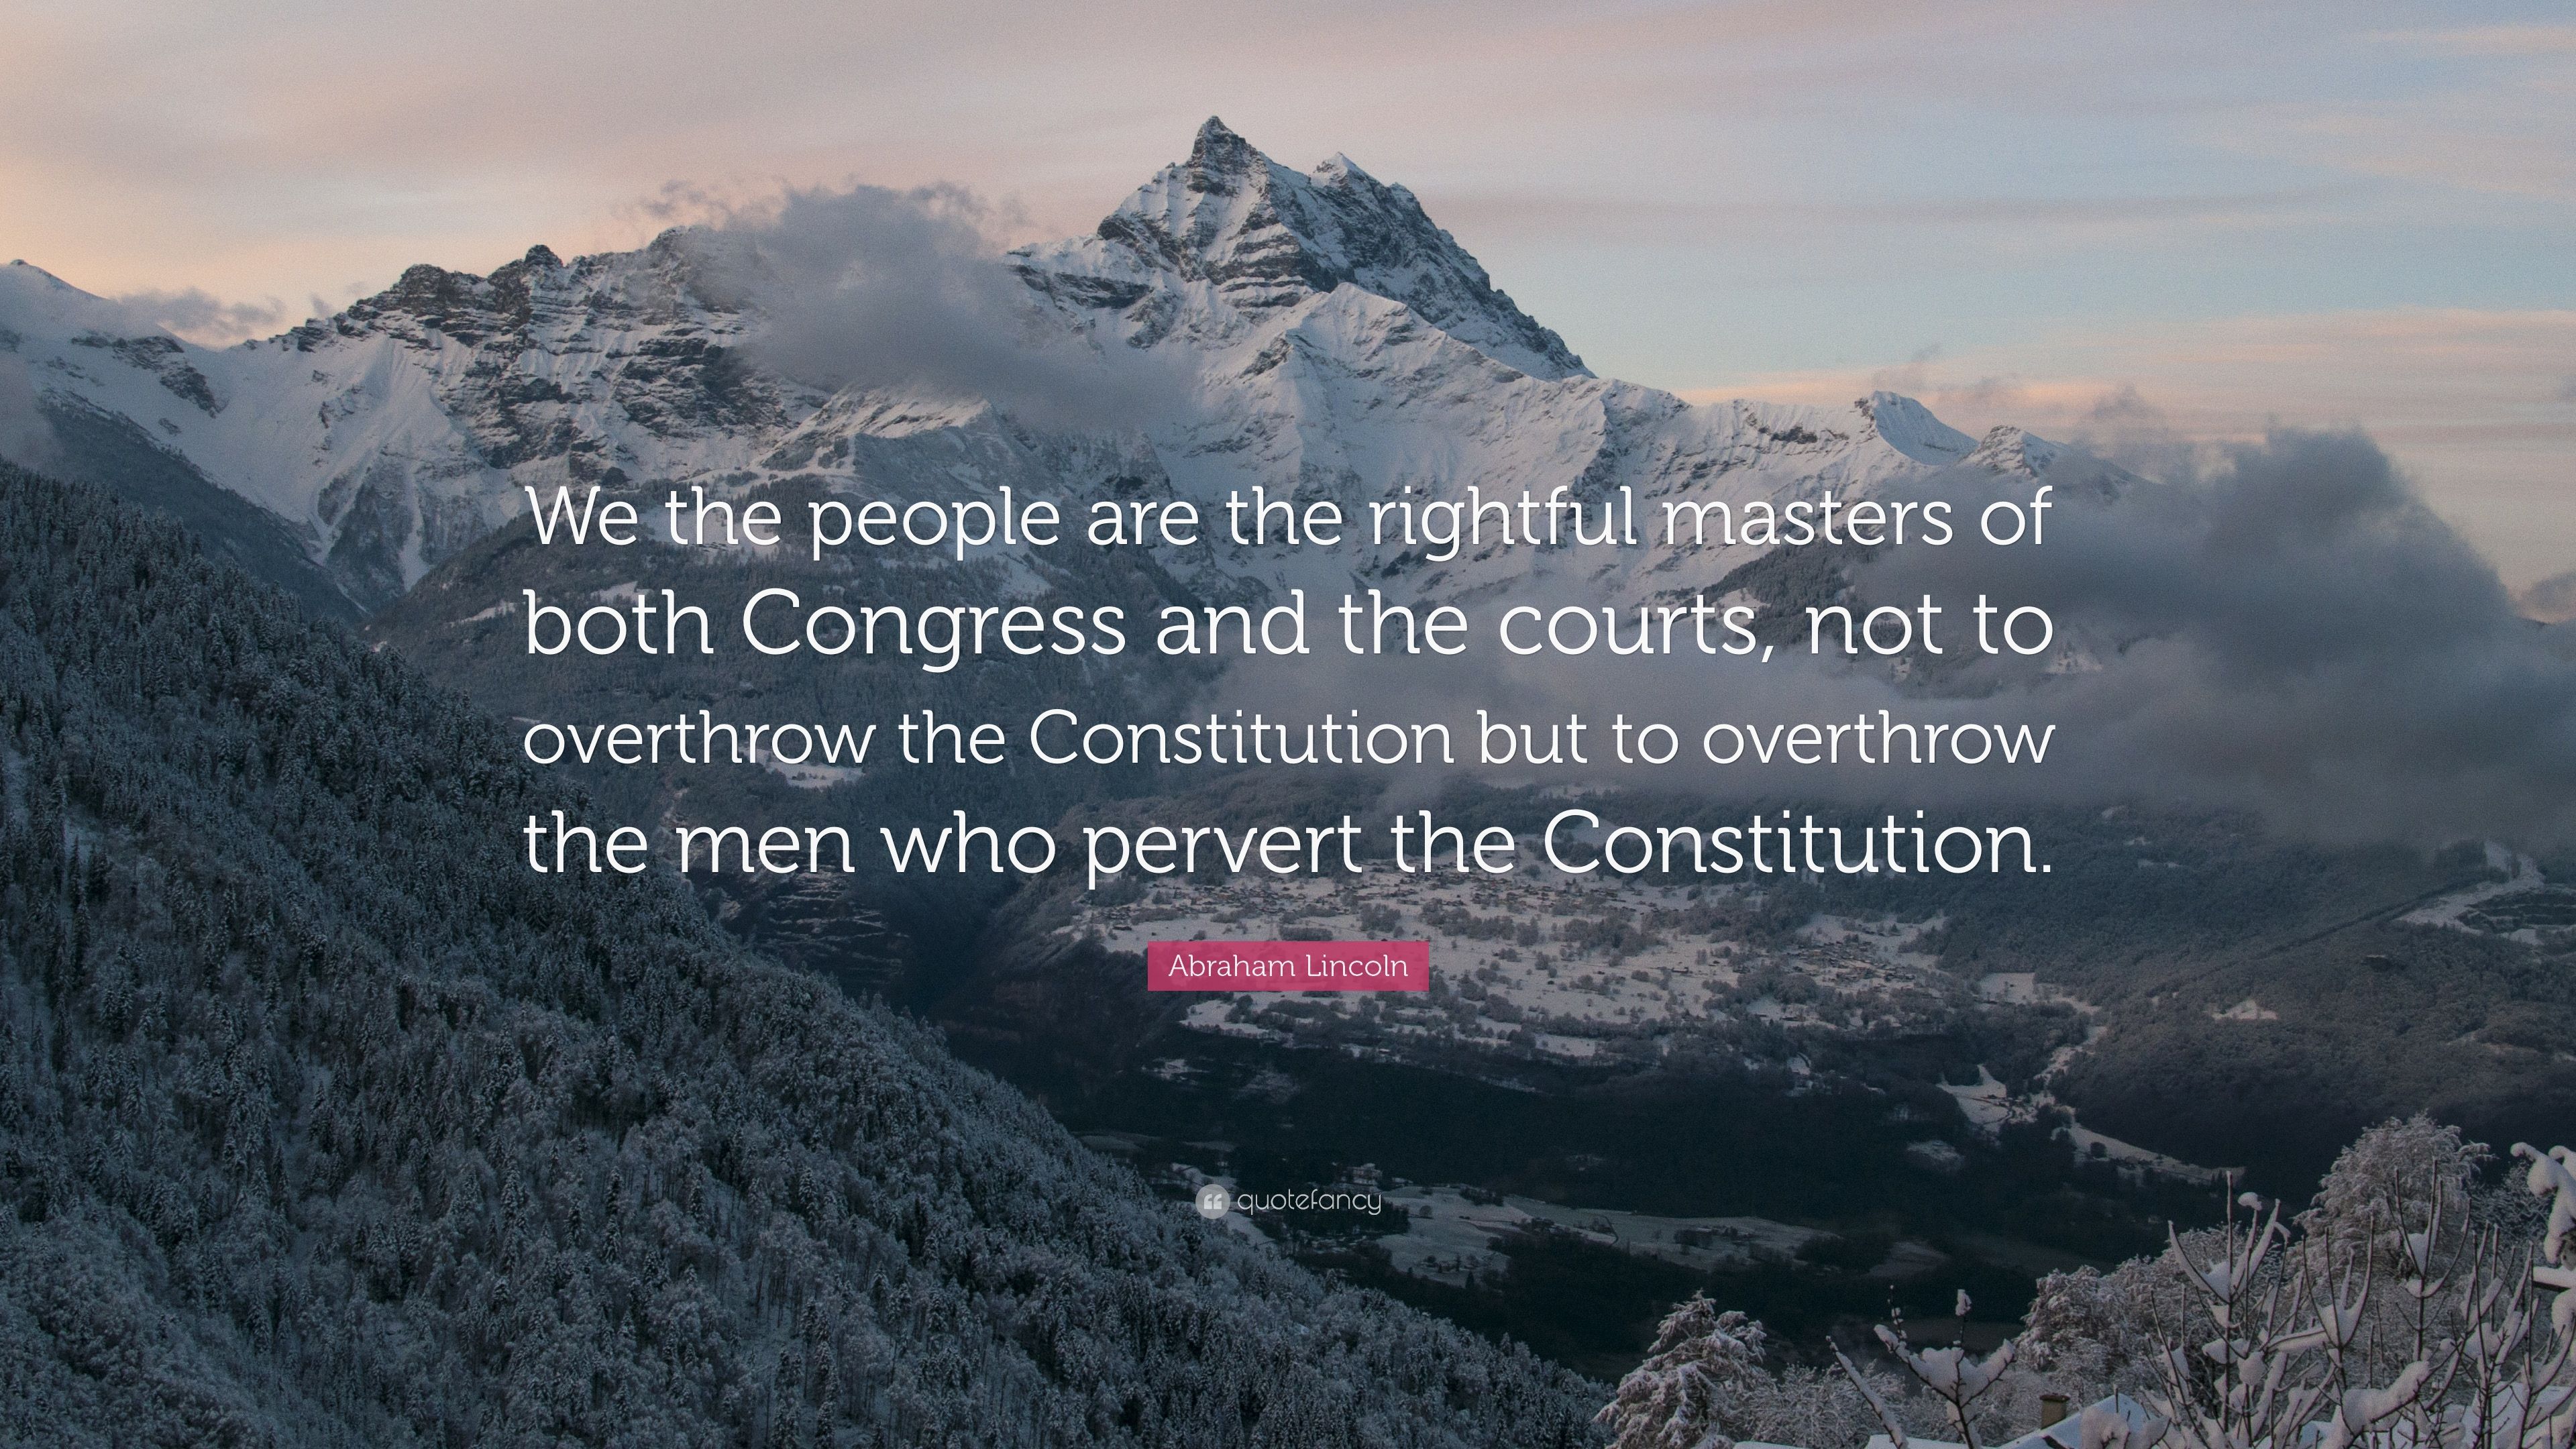 Abraham Lincoln Quote: “We the people are the rightful masters